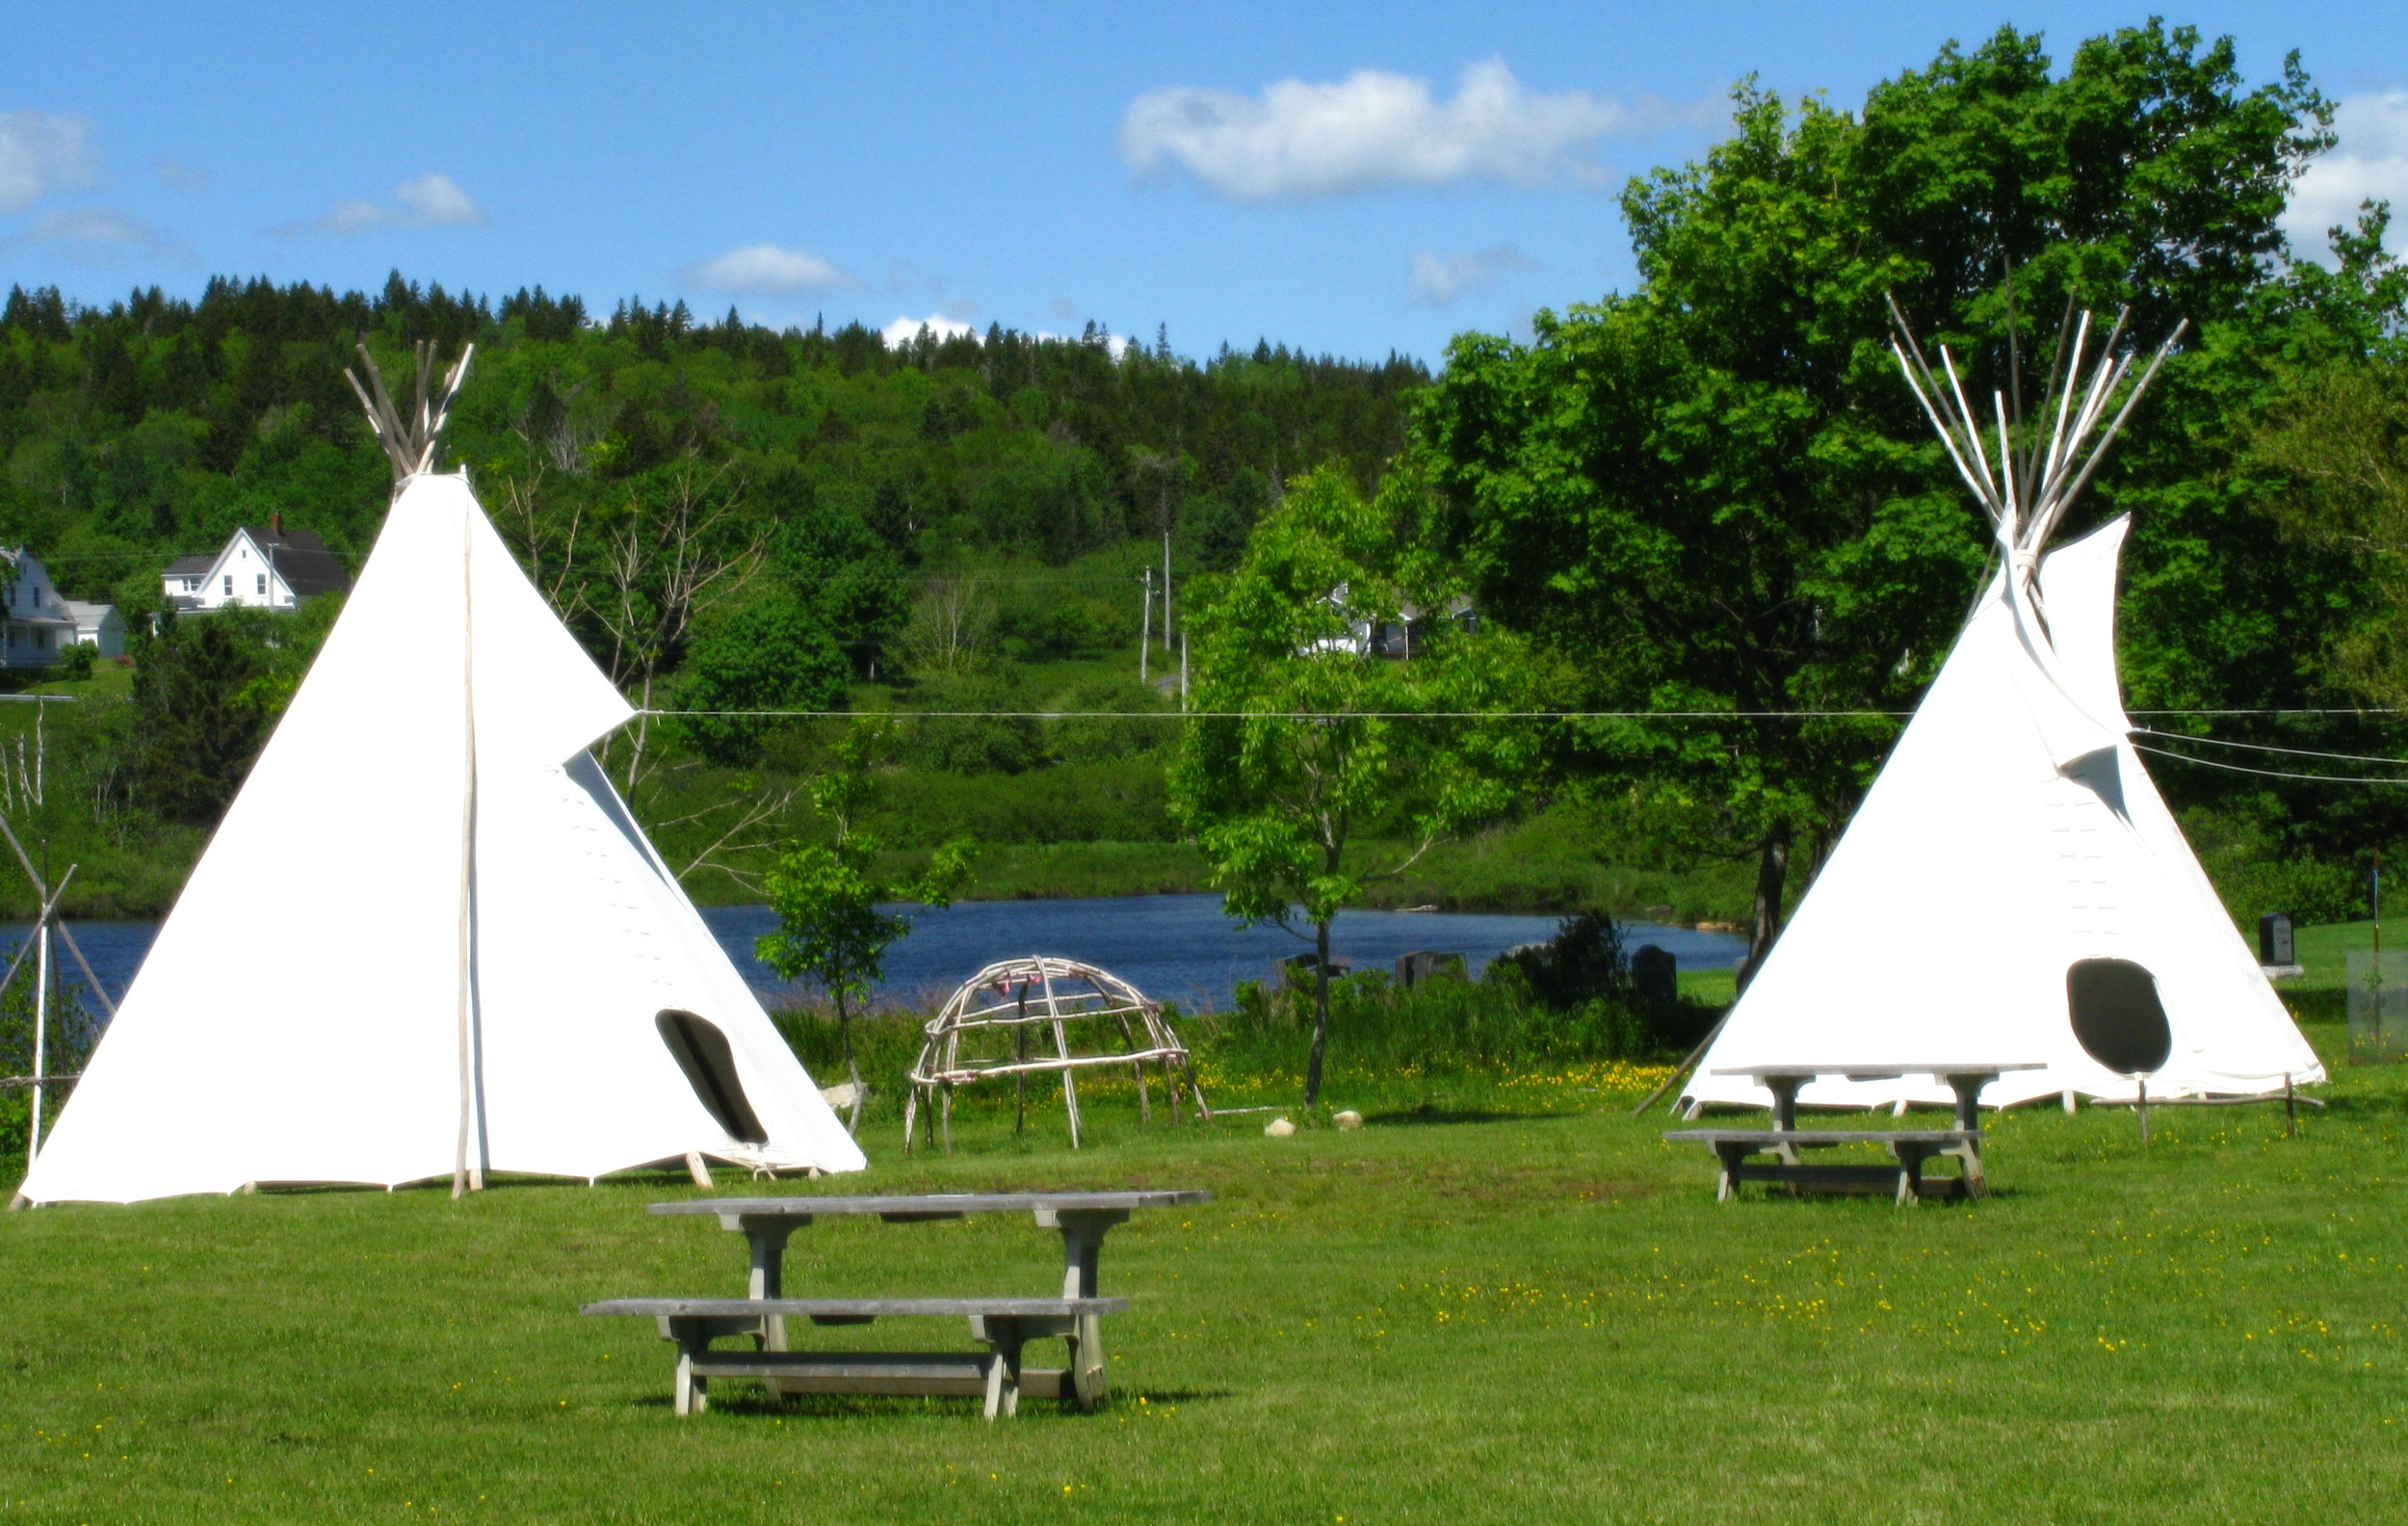   The museum grounds celebrate Mi’kmaq heritage with a small interpretive village including a teepee, communal fire setting, and native plant medicine knowledge. Local Mi’kmaq community members often sell and showcase many of their traditional crafts